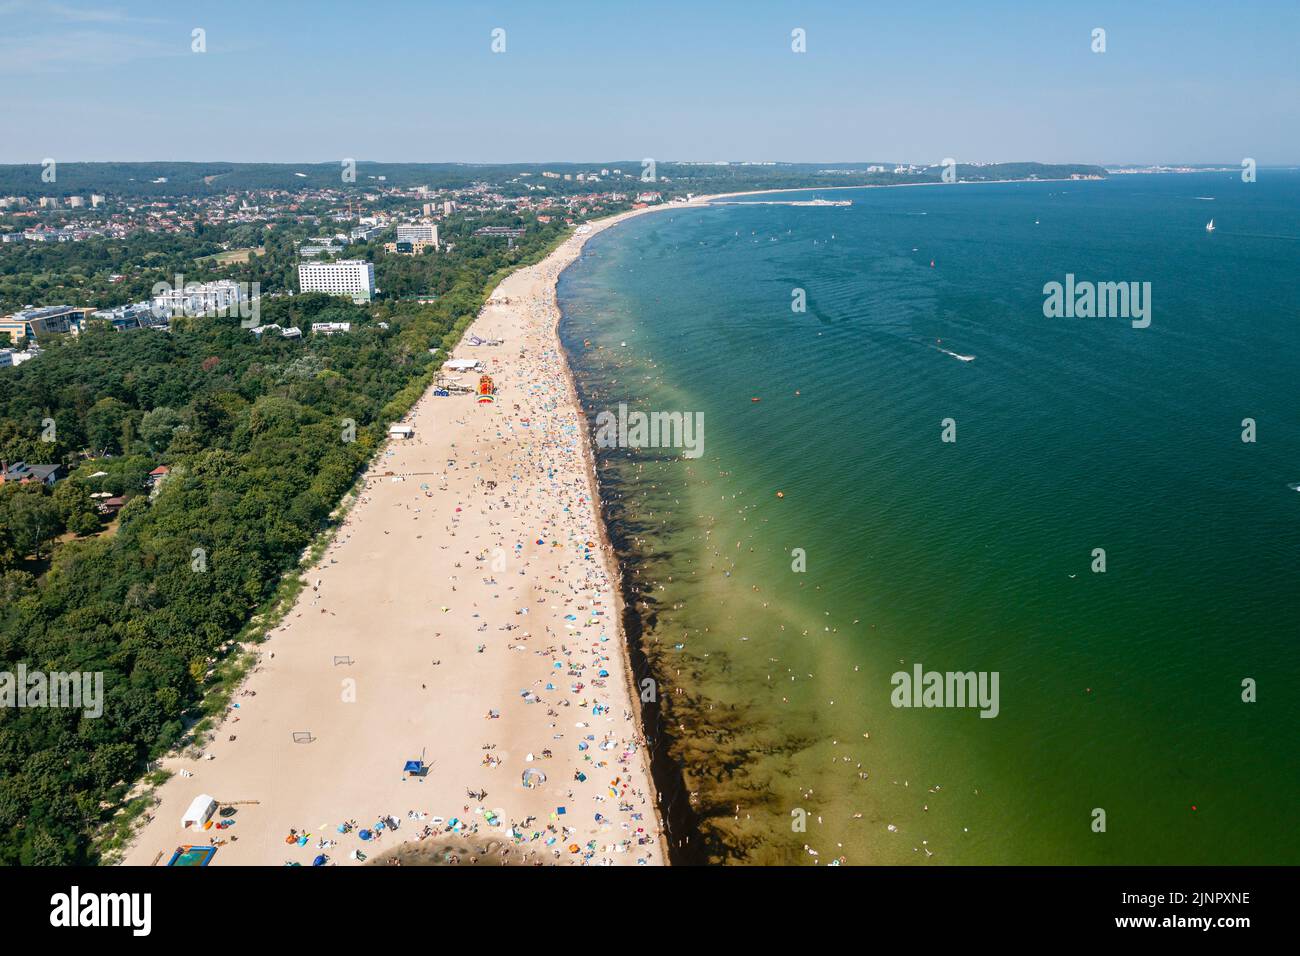 Baltic coast, people having bath in the sea during hot summertime weekend Stock Photo